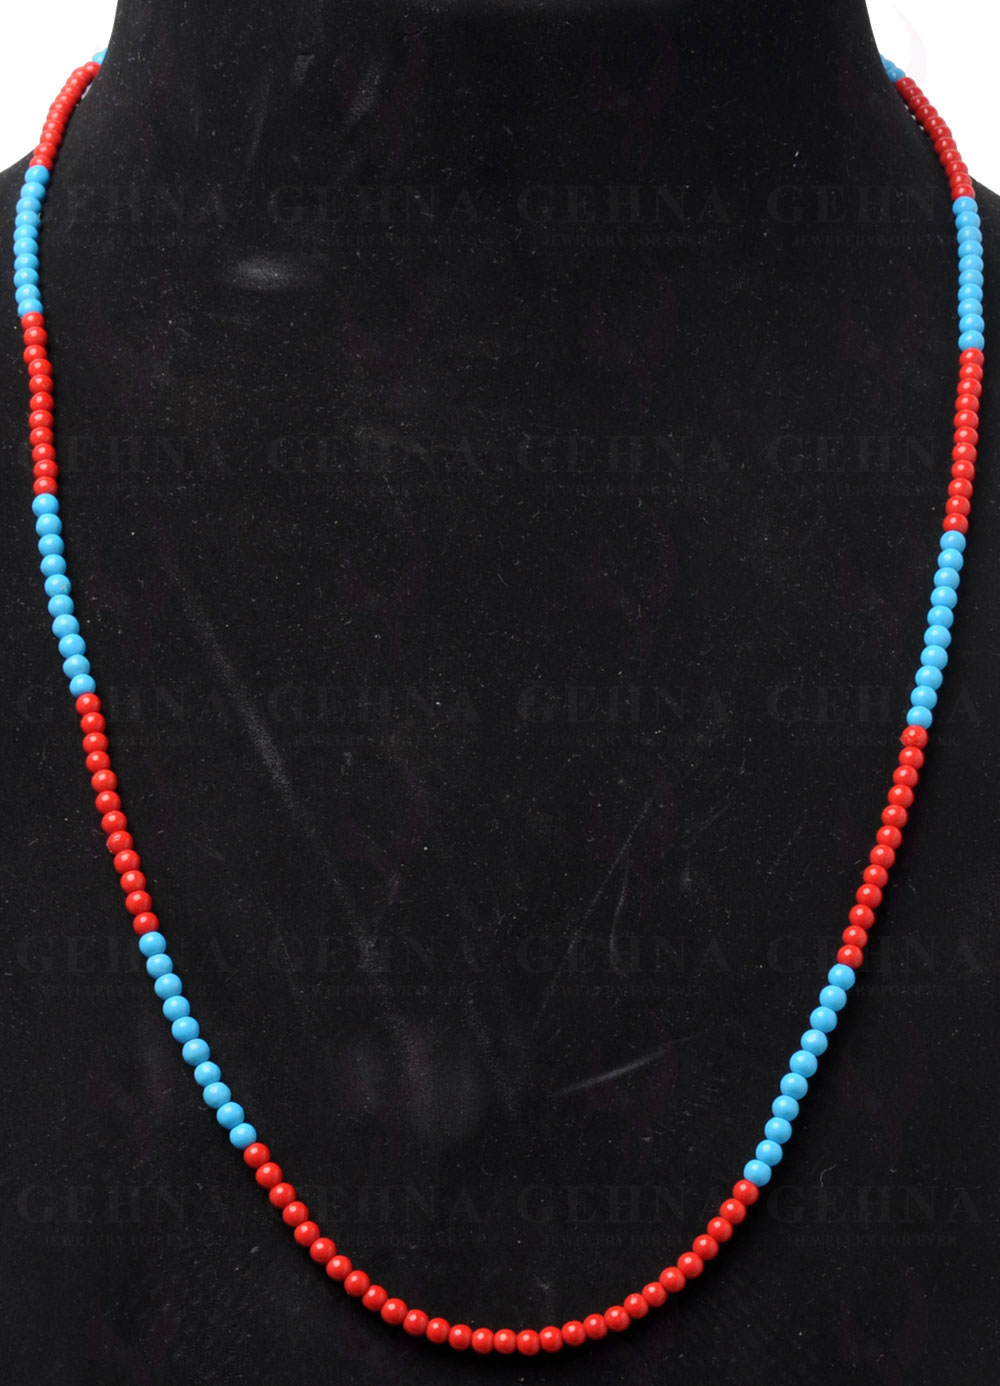 24" Inches of Red Jasper & Turquoise Gemstone Bead Necklace NS-1496